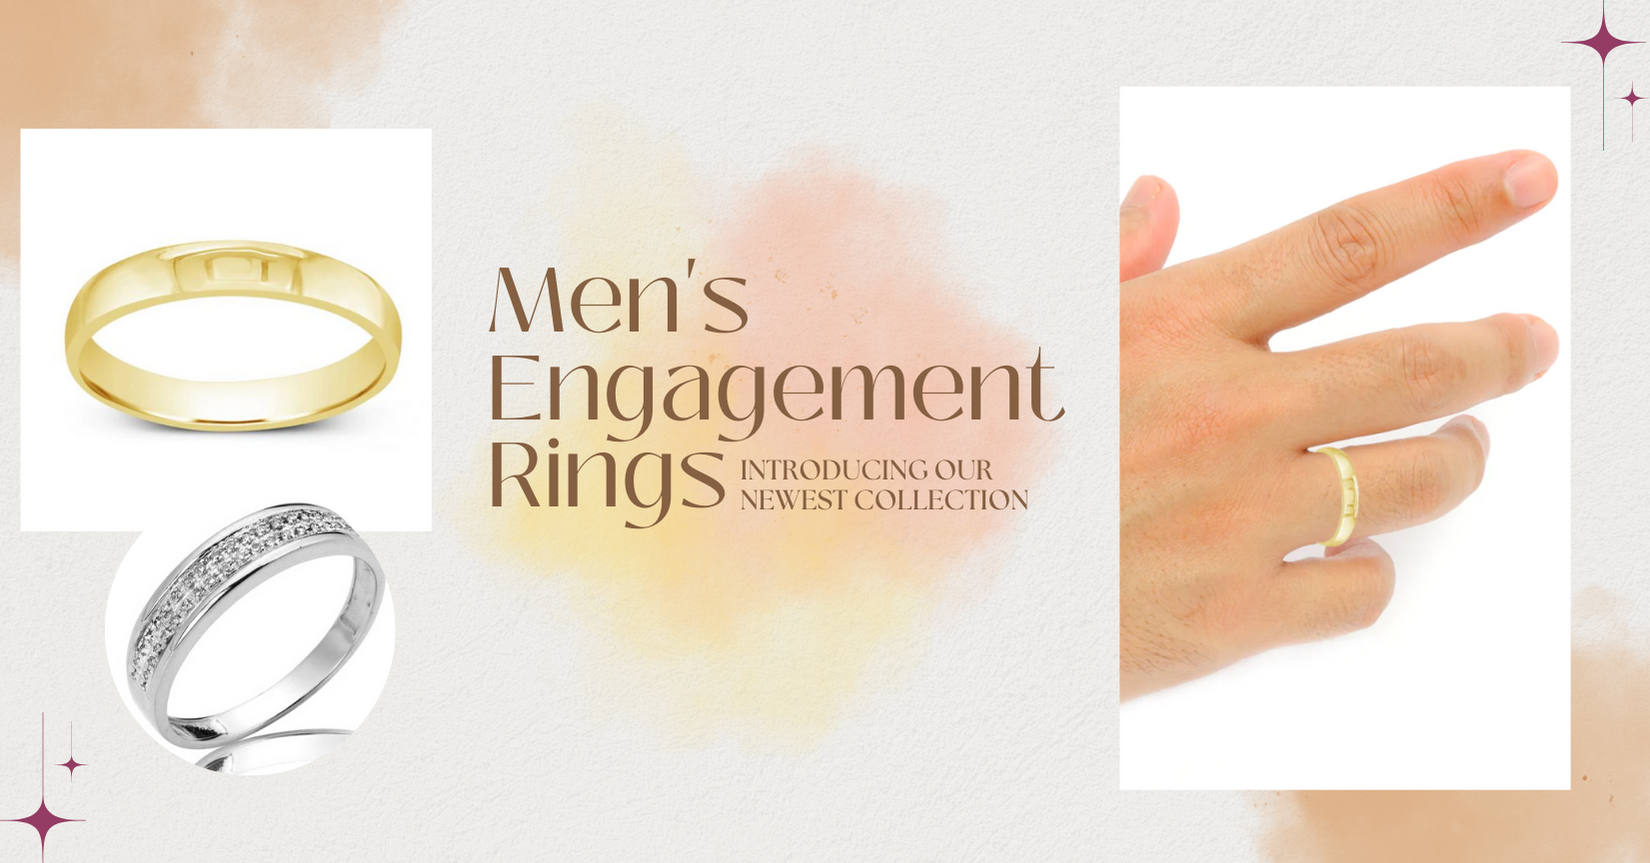 Men's Engagement Rings INTRODUCING OUR NEWEST COLLECTION